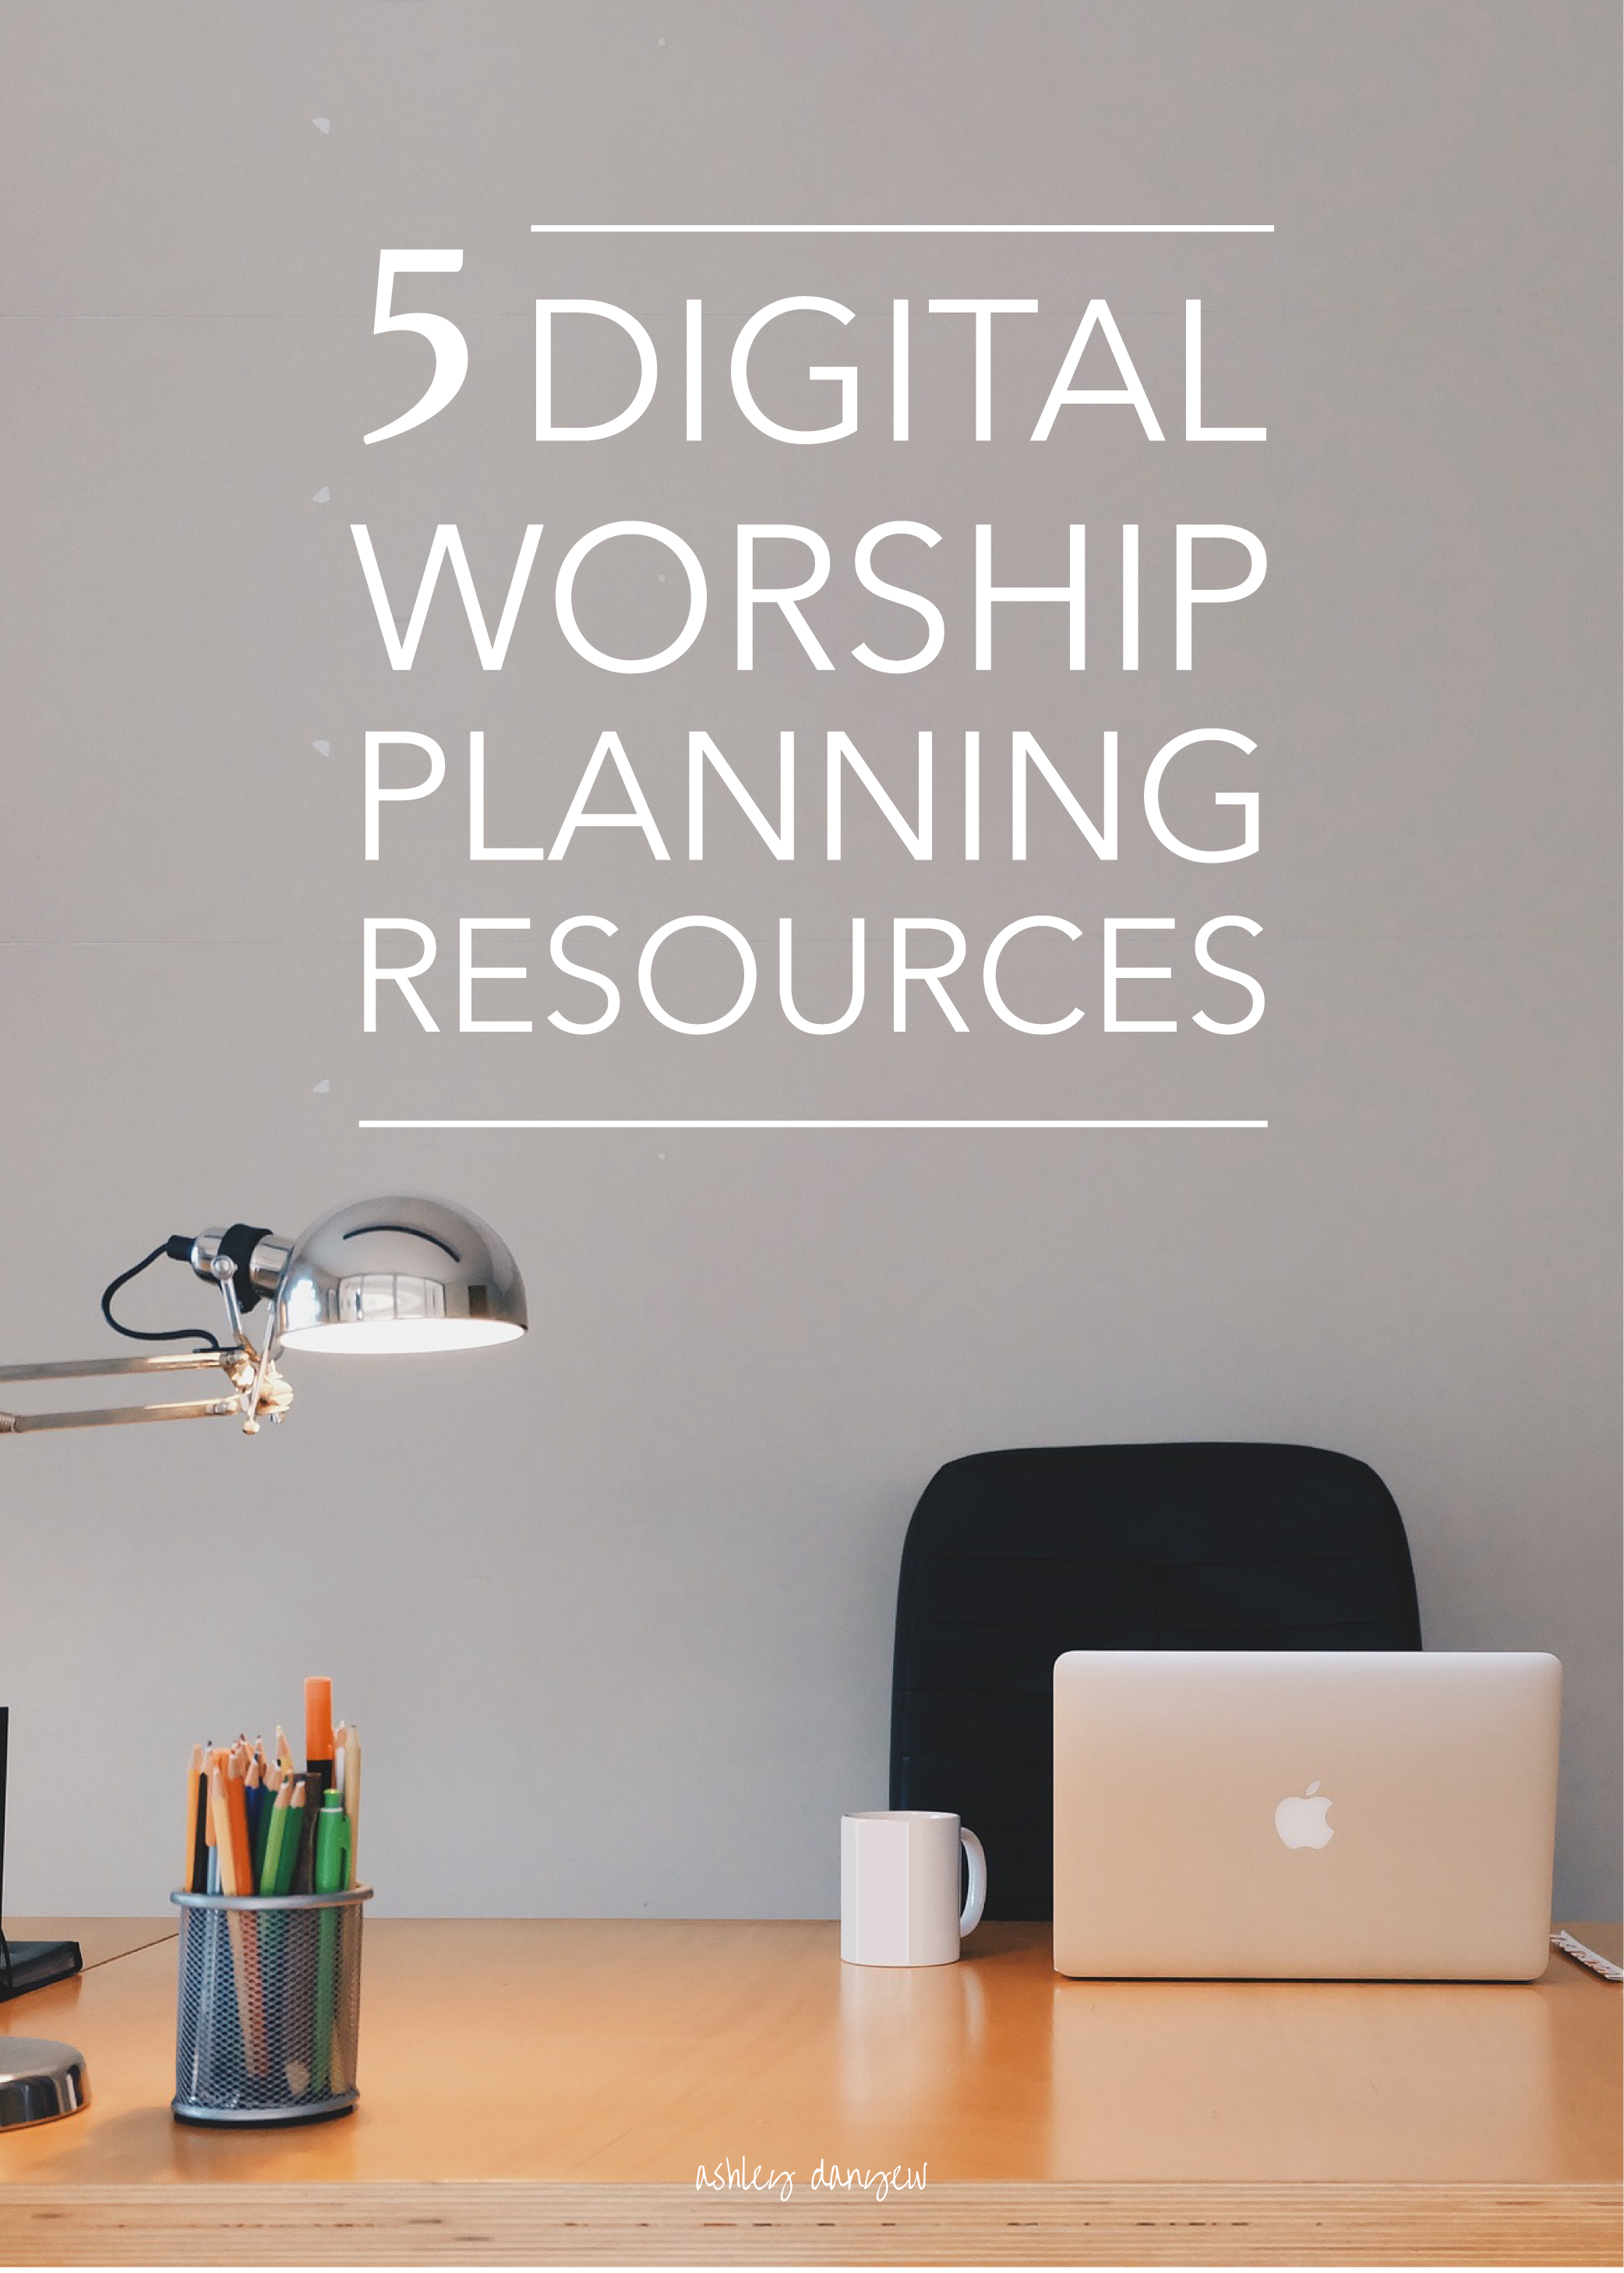 Copy of 5 Digital Worship Planning Resources